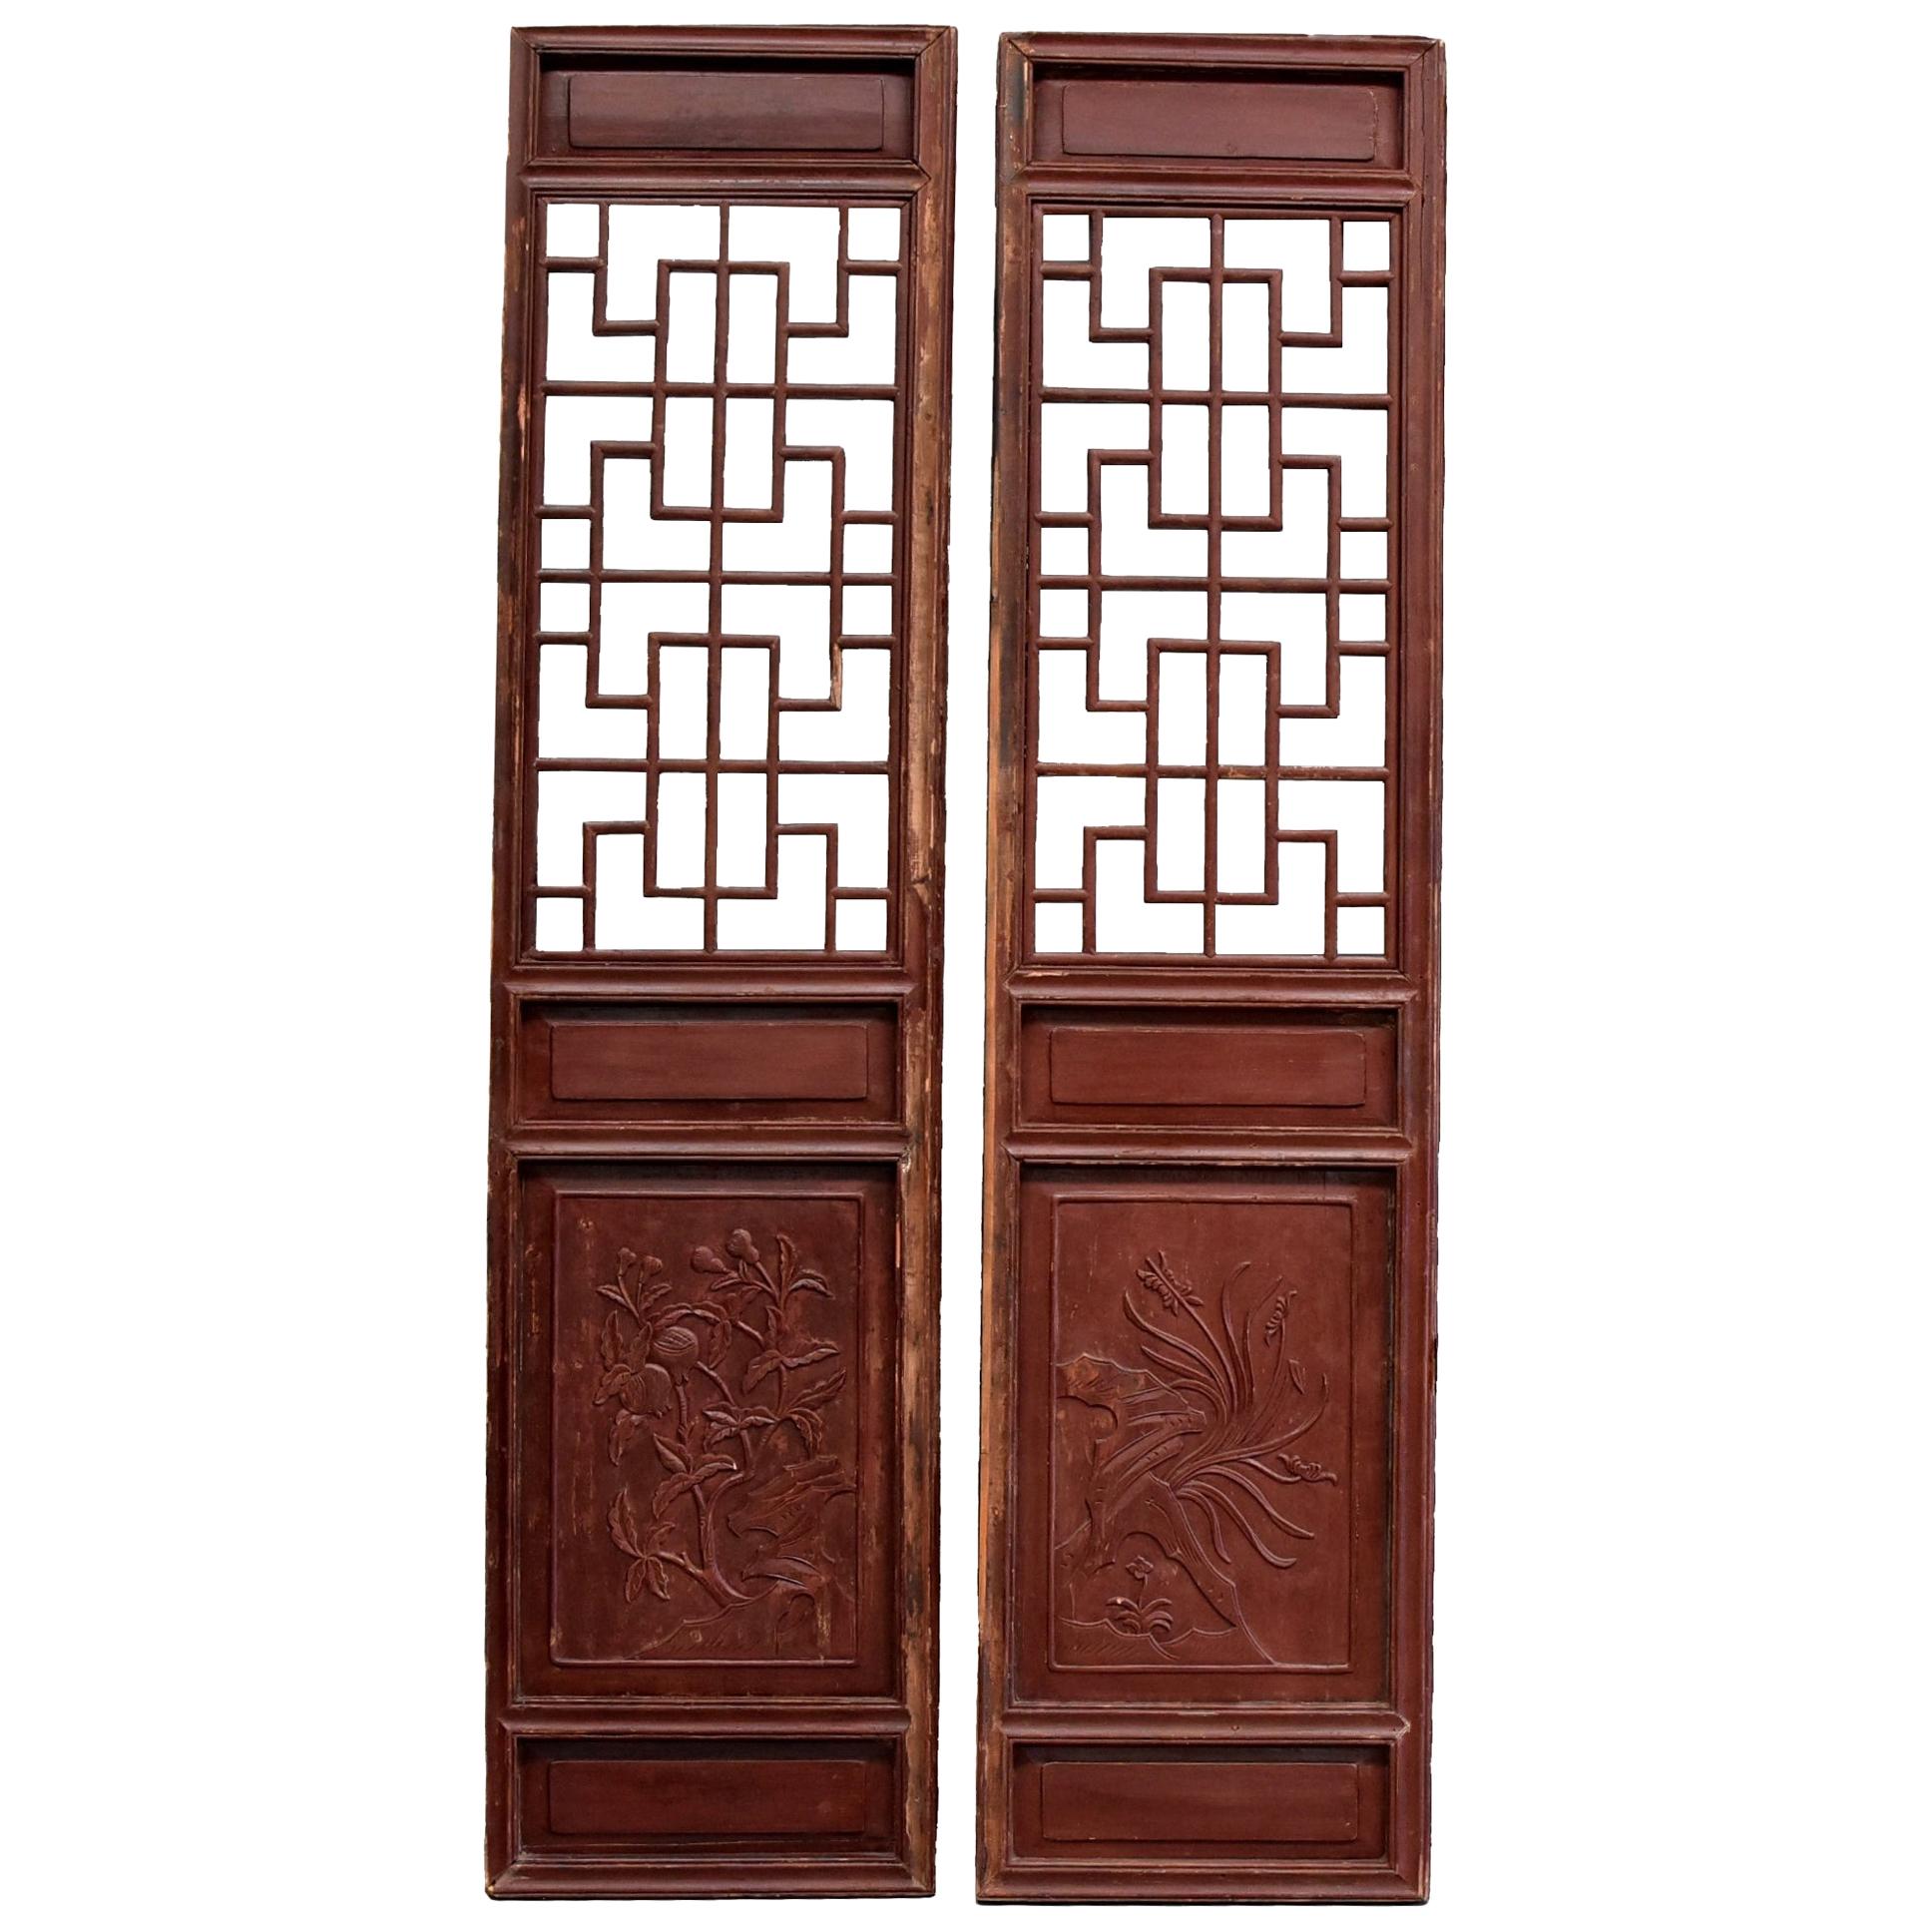 Pair of Chinese Antique Screens, Doors, Orchids and Pomegranates